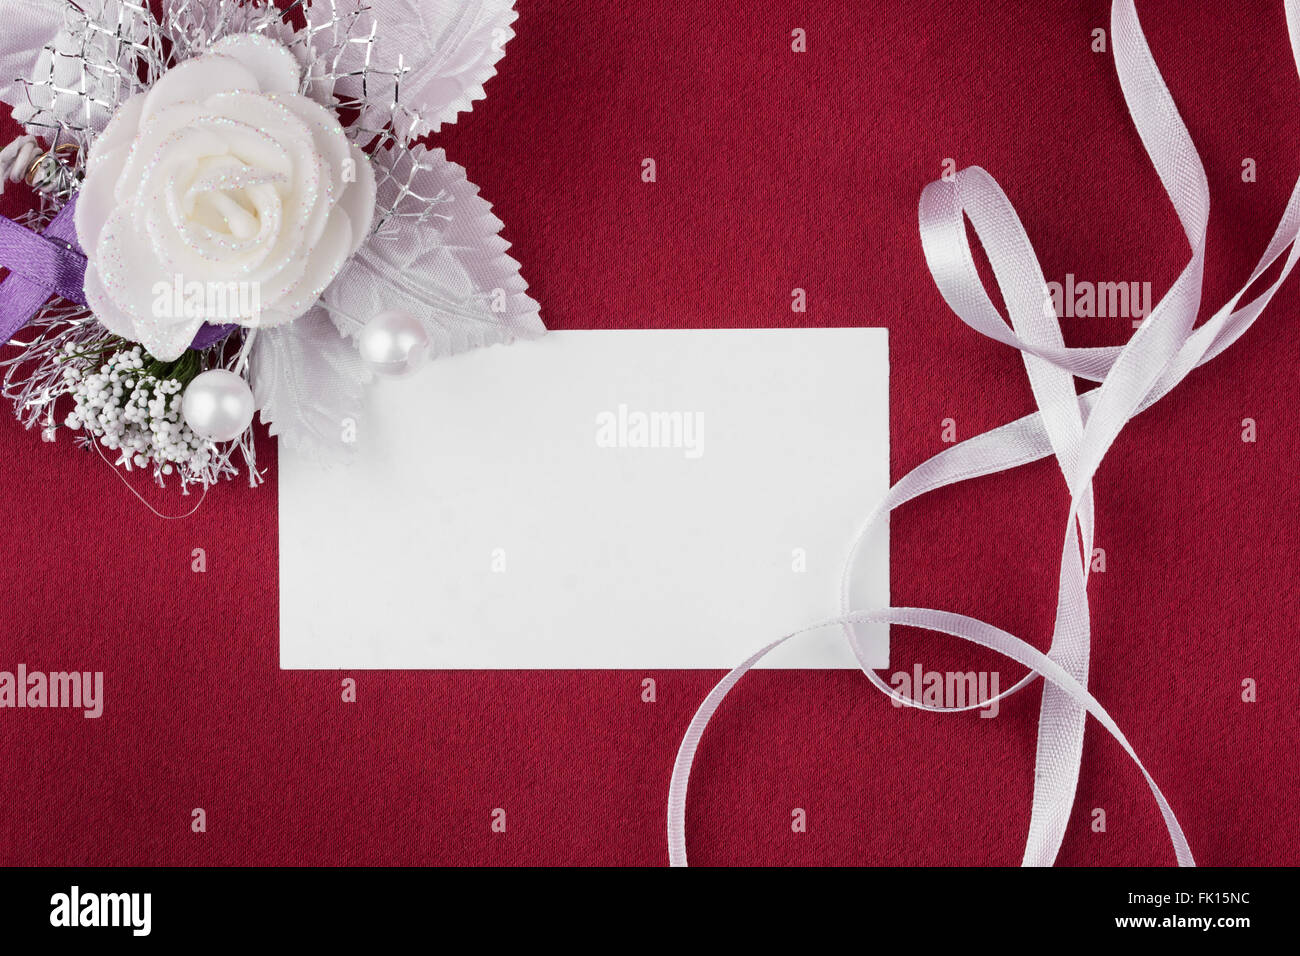 Background with  flower and empty tag for your text on red silk  background.  Square image. Stock Photo